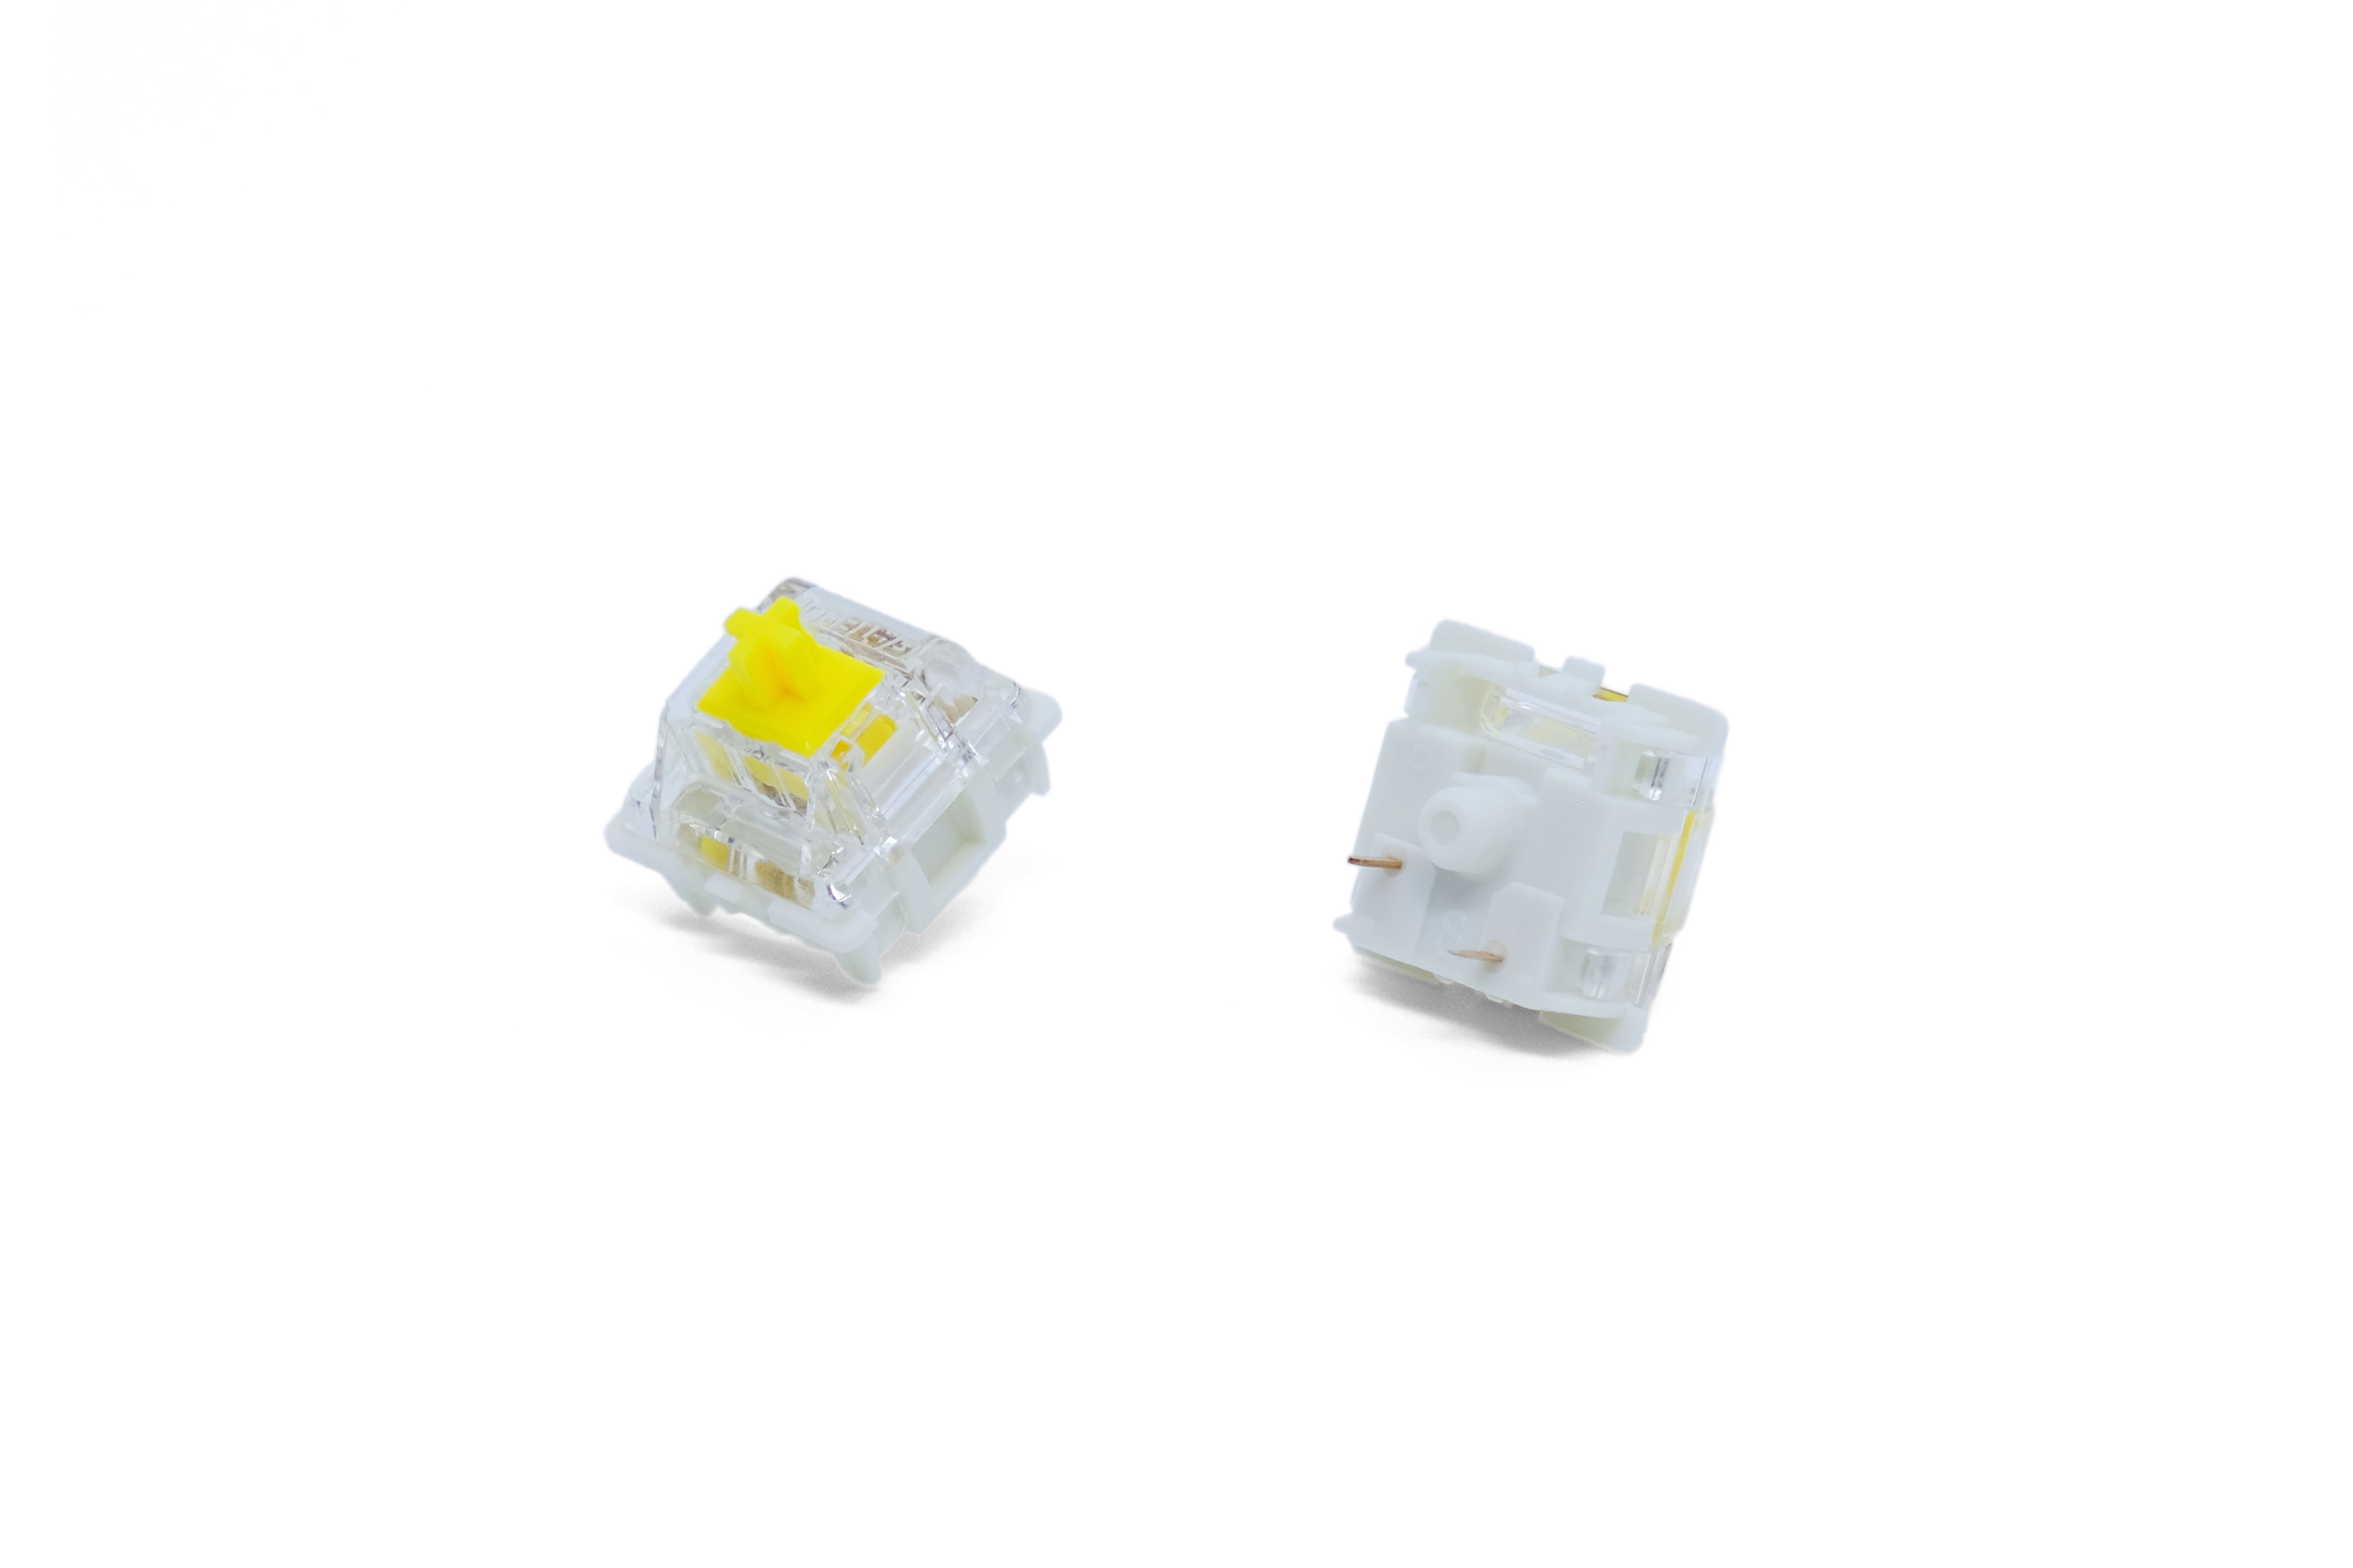 Gateron KS-9 Pro 2.0 Yellow Linear Switches at KeebsForAll